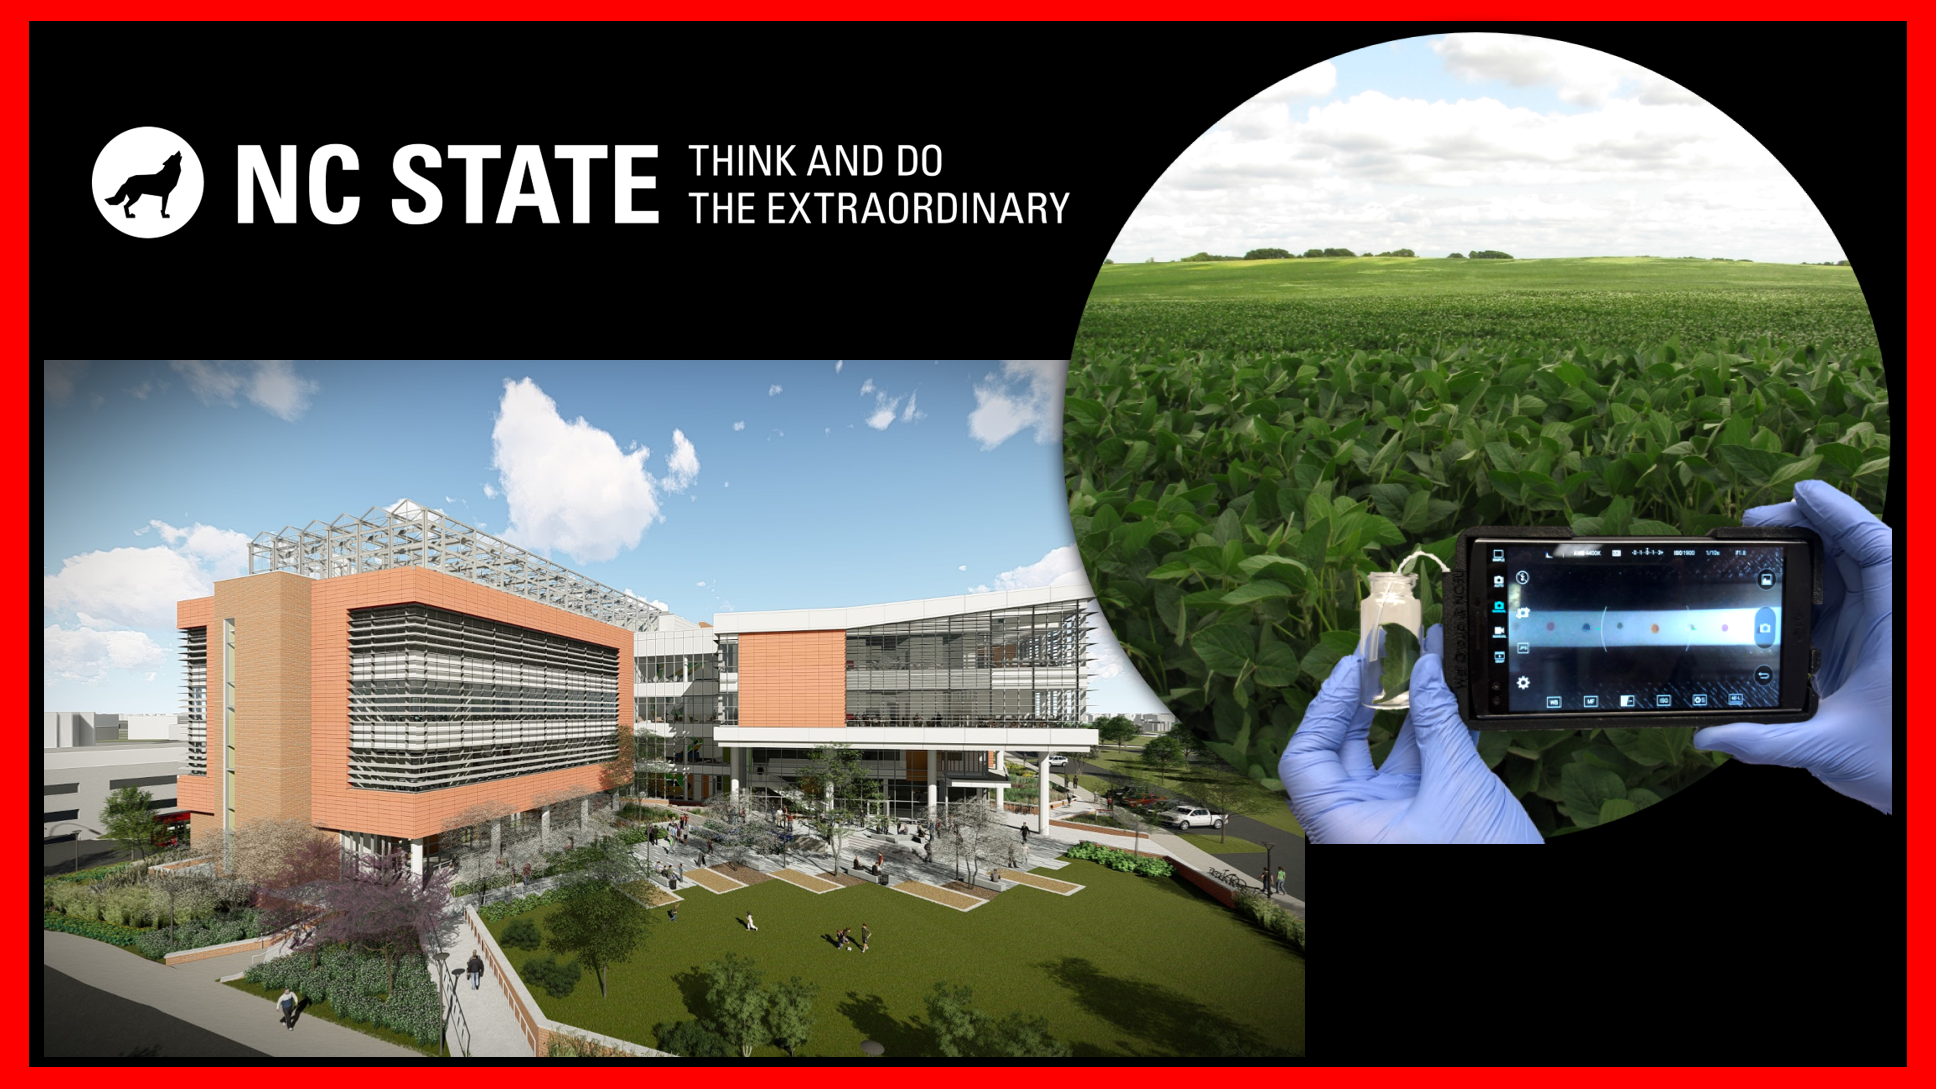 Plant Sciences Building rendering and smartphone in a field